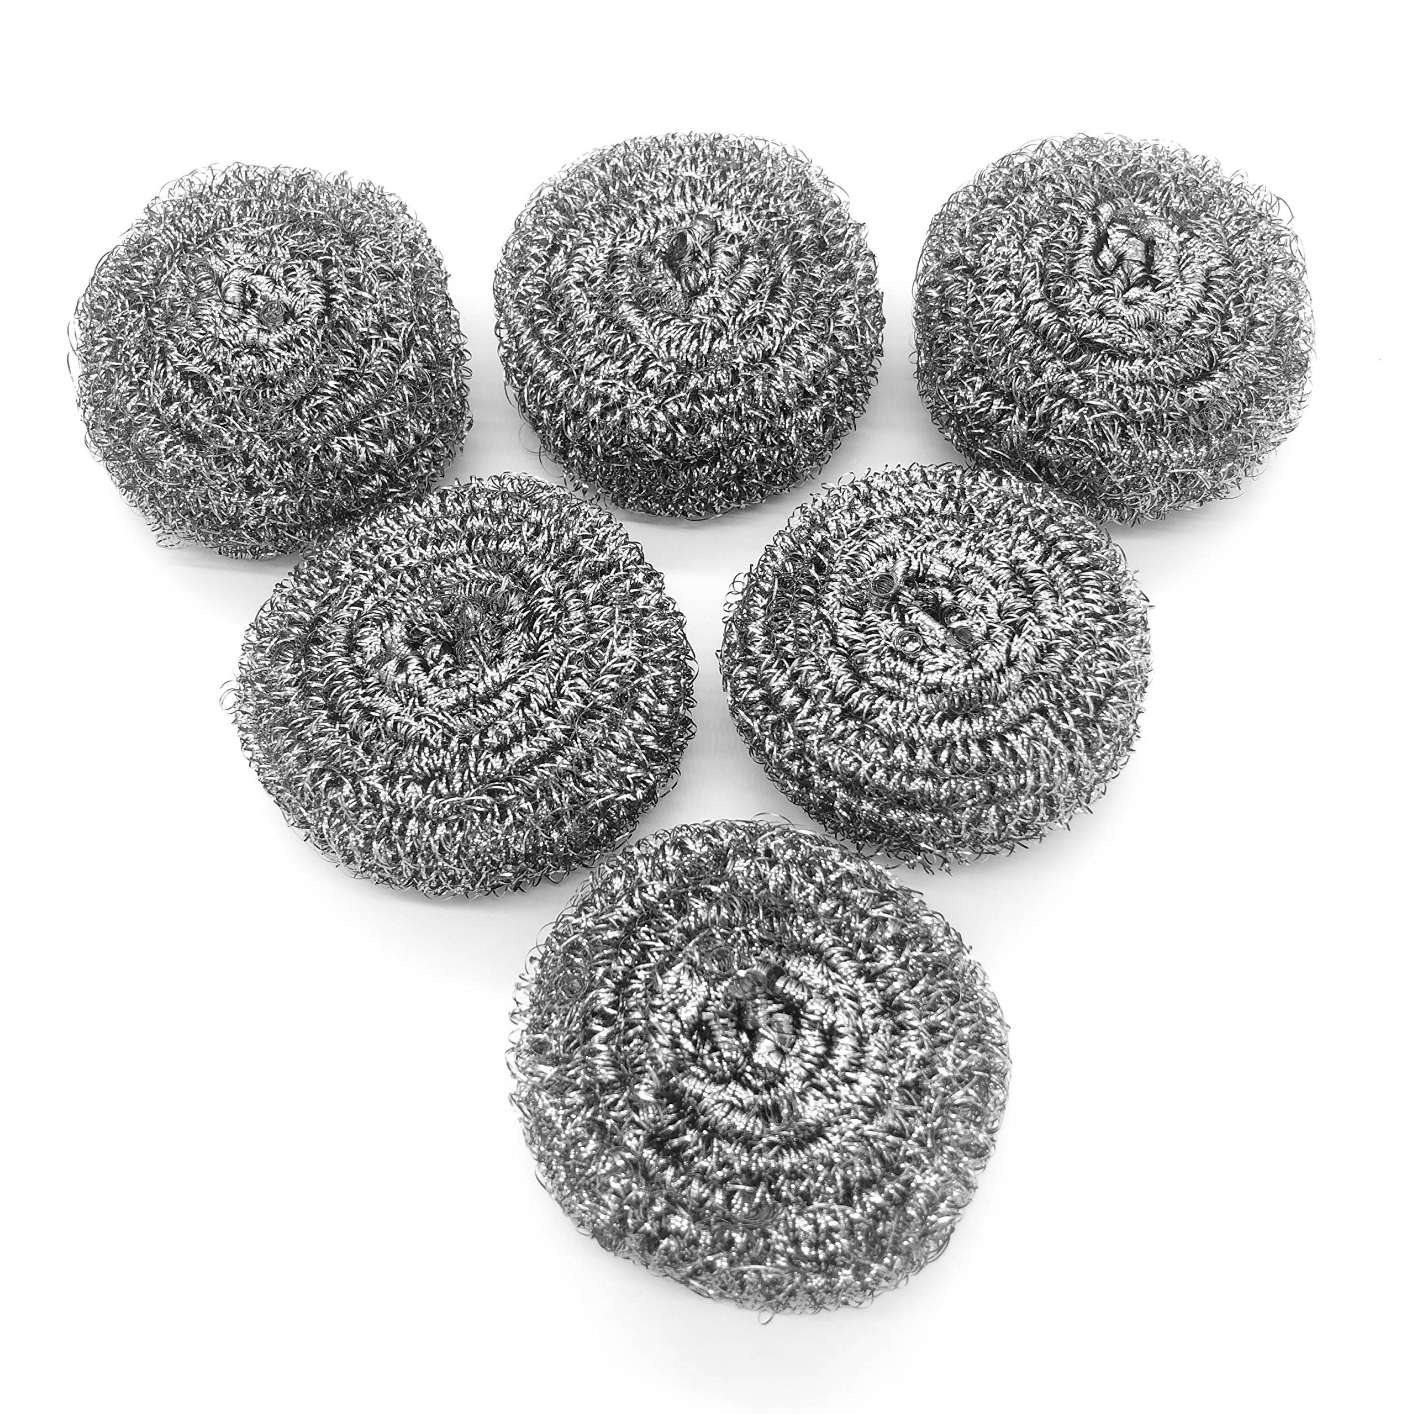 a011 6 Pcs Stainless Steel Sponges, Scrubbing Scouring Pad, Steel Wool Scrubber for Kitchens, Bathroom and More